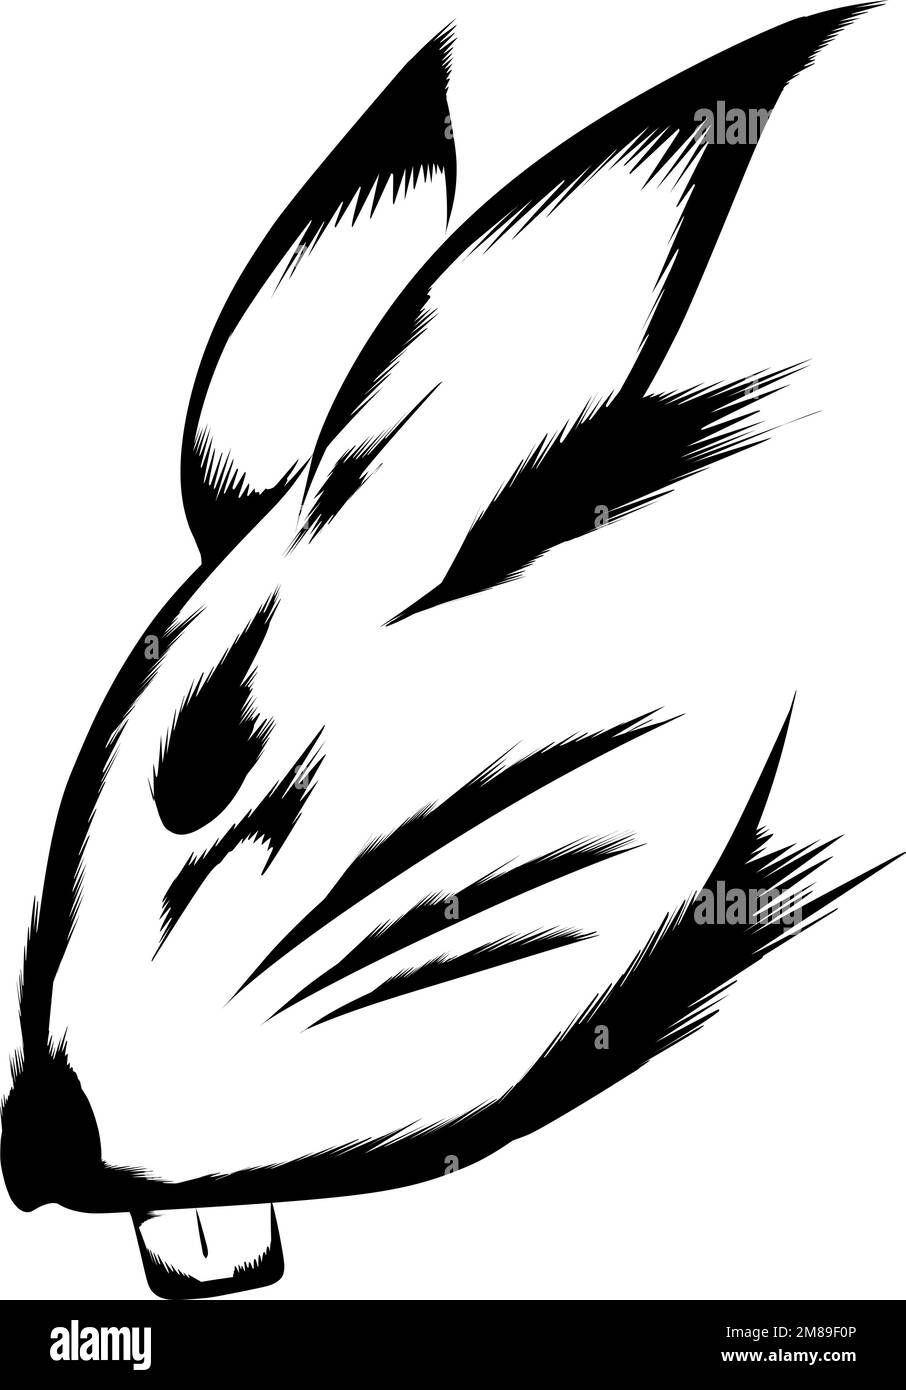 Rabbit head design. Wild Animals. Rabbit logo or icon. Suitable for stickers, logos and others Stock Vector